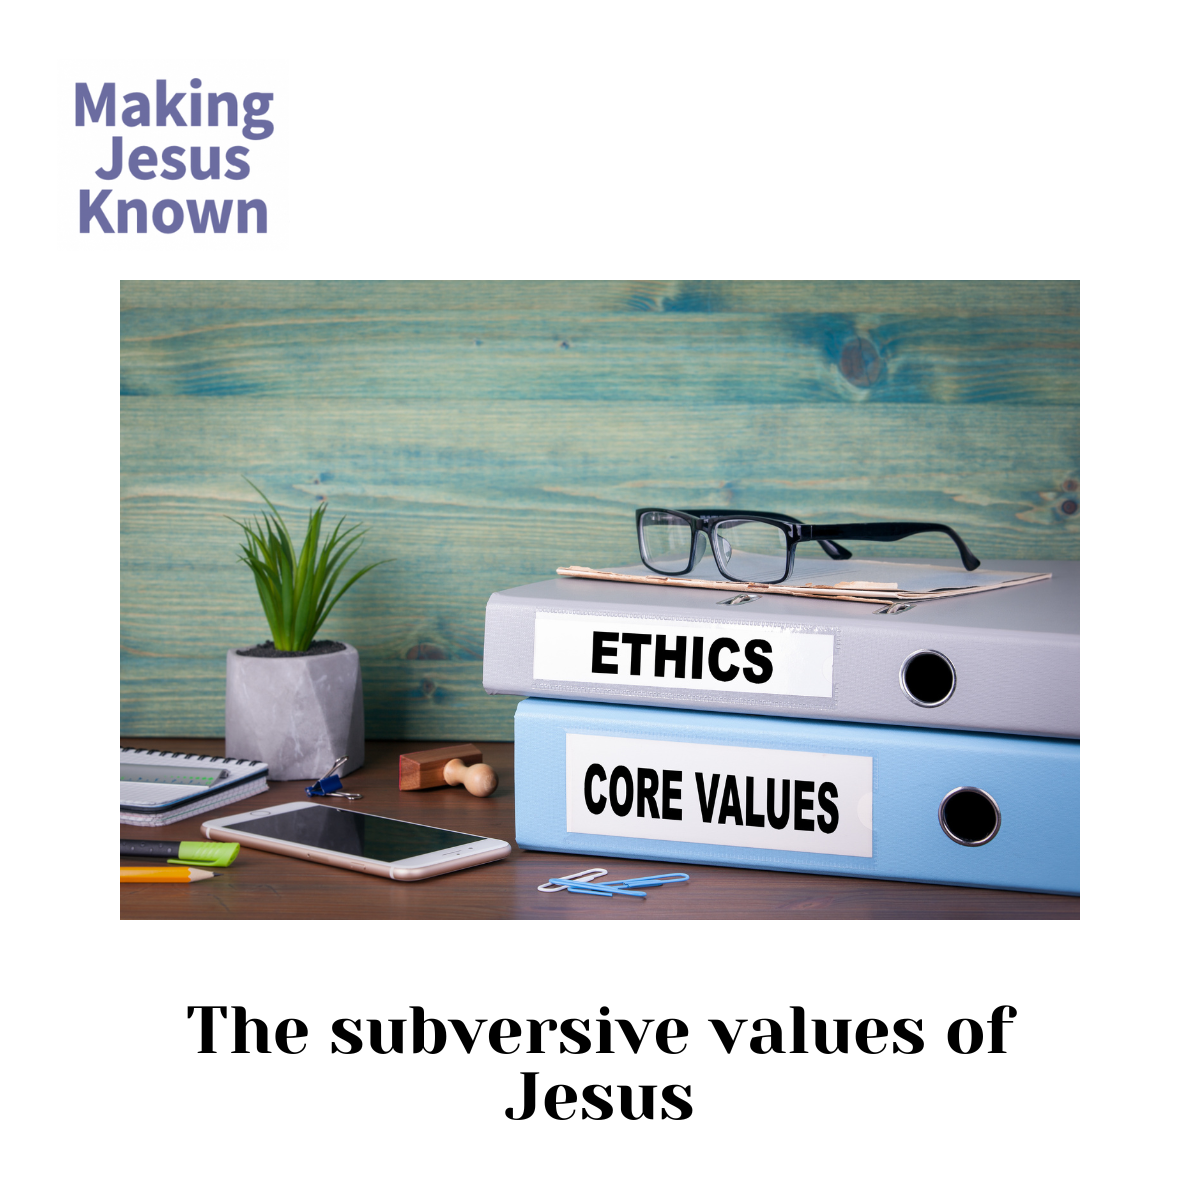 Making the subversive values of Jesus known